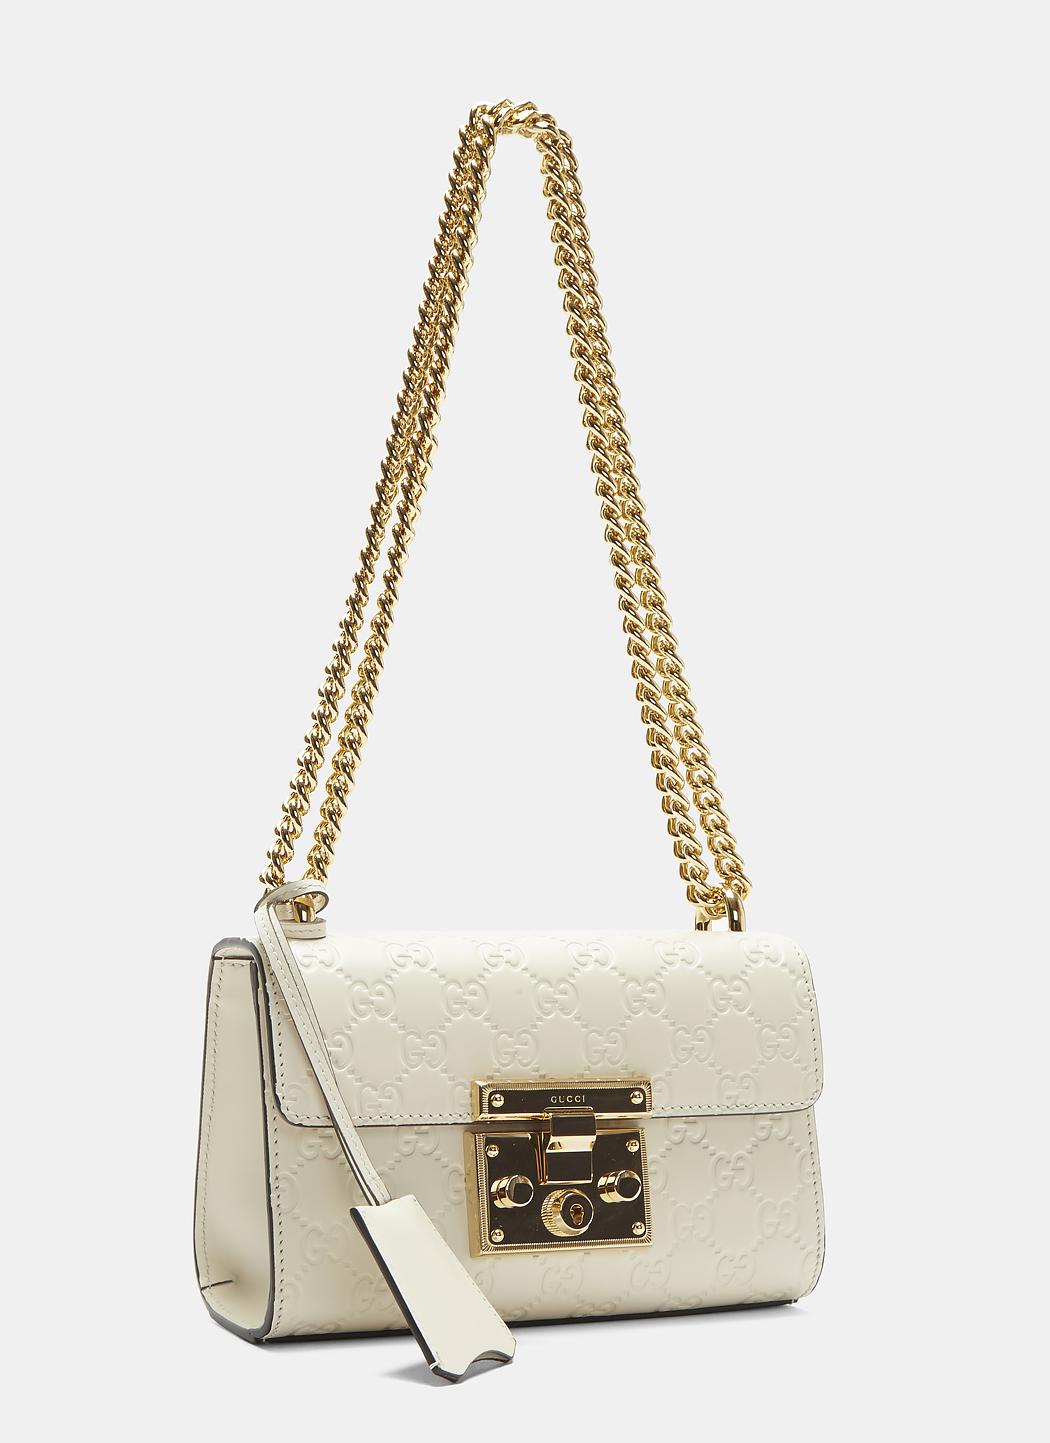 Gucci Leather Padlock Small Shoulder Bag In White - Lyst